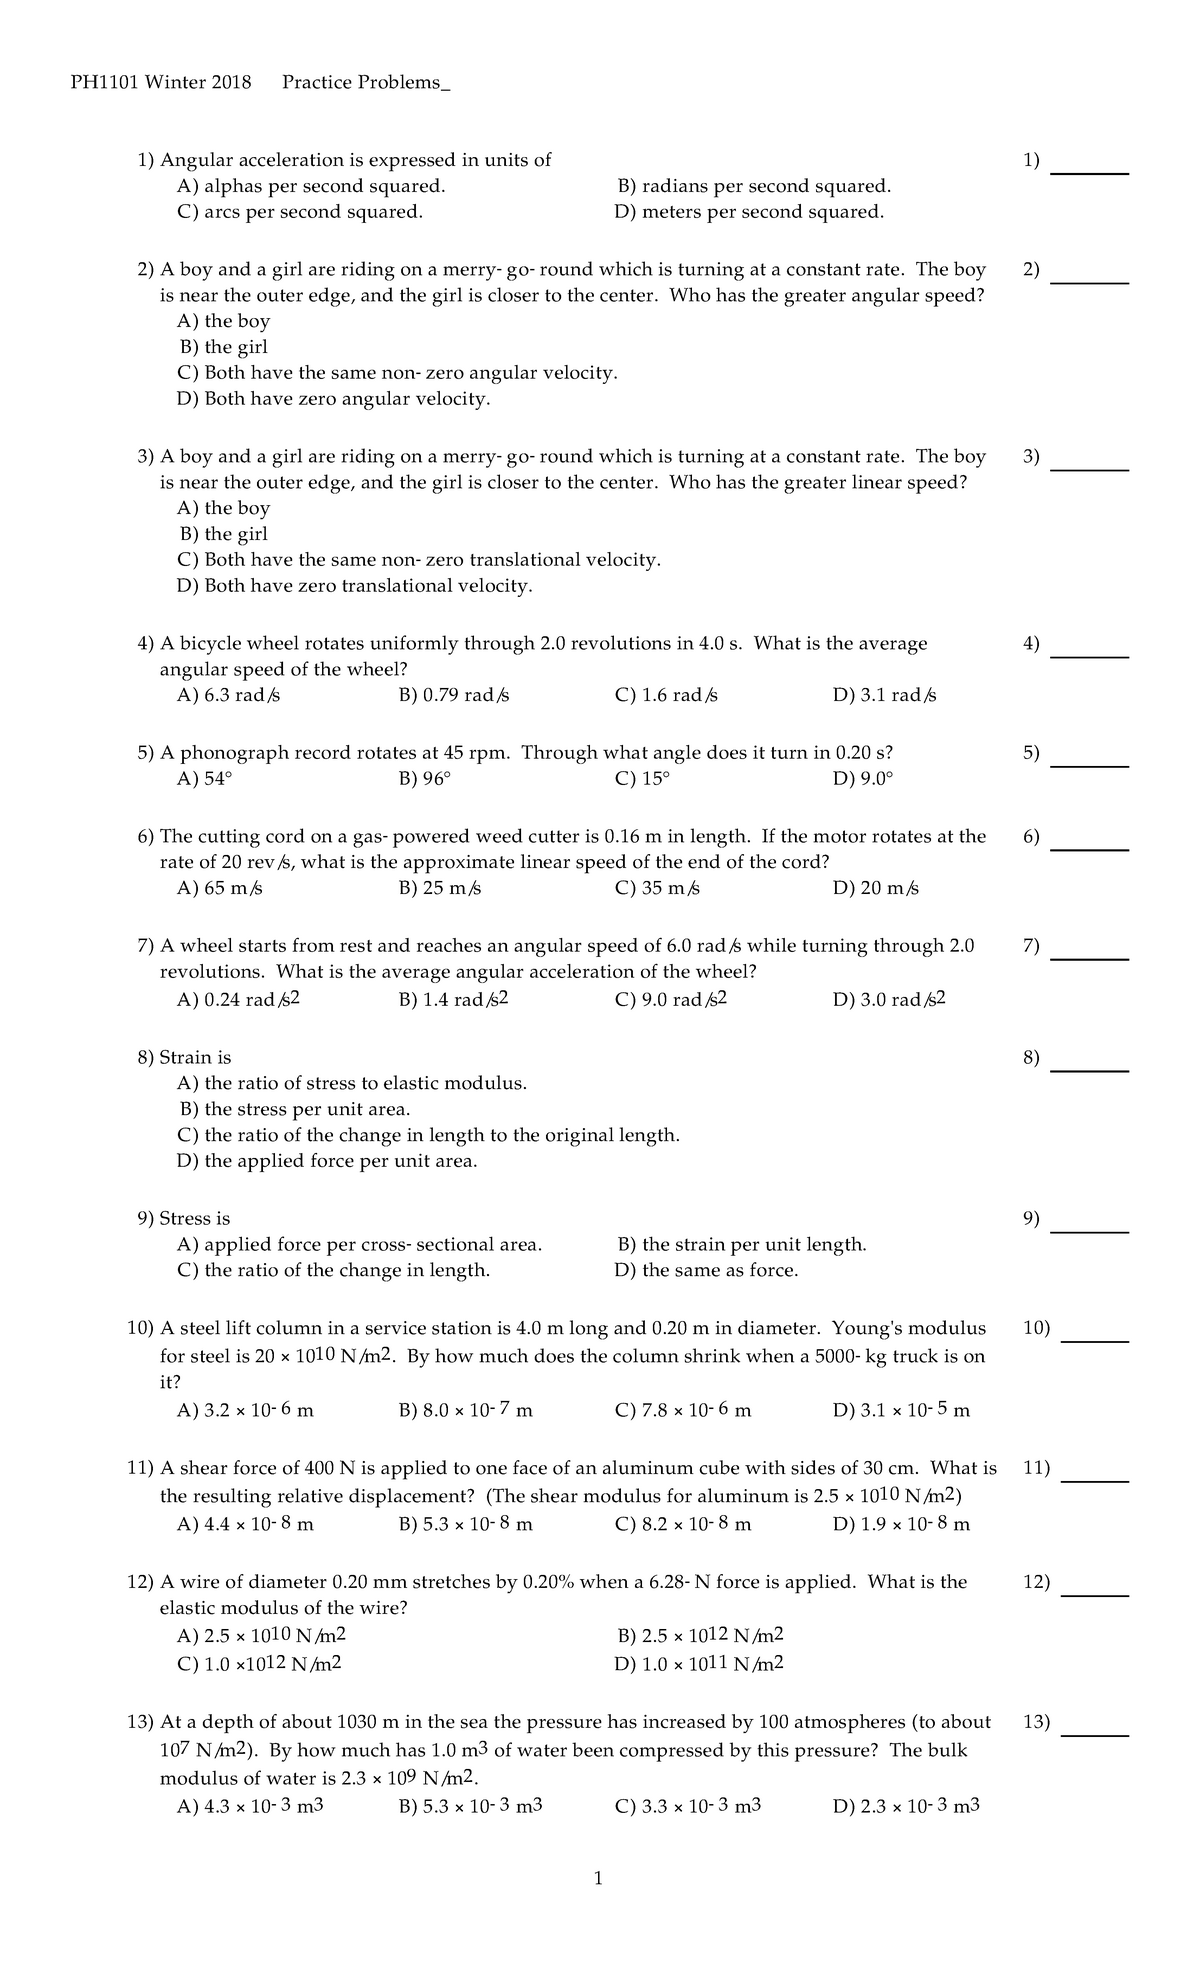 Final Exam Practice Multiple Choice Questions and Awnsers - PH1101 ...